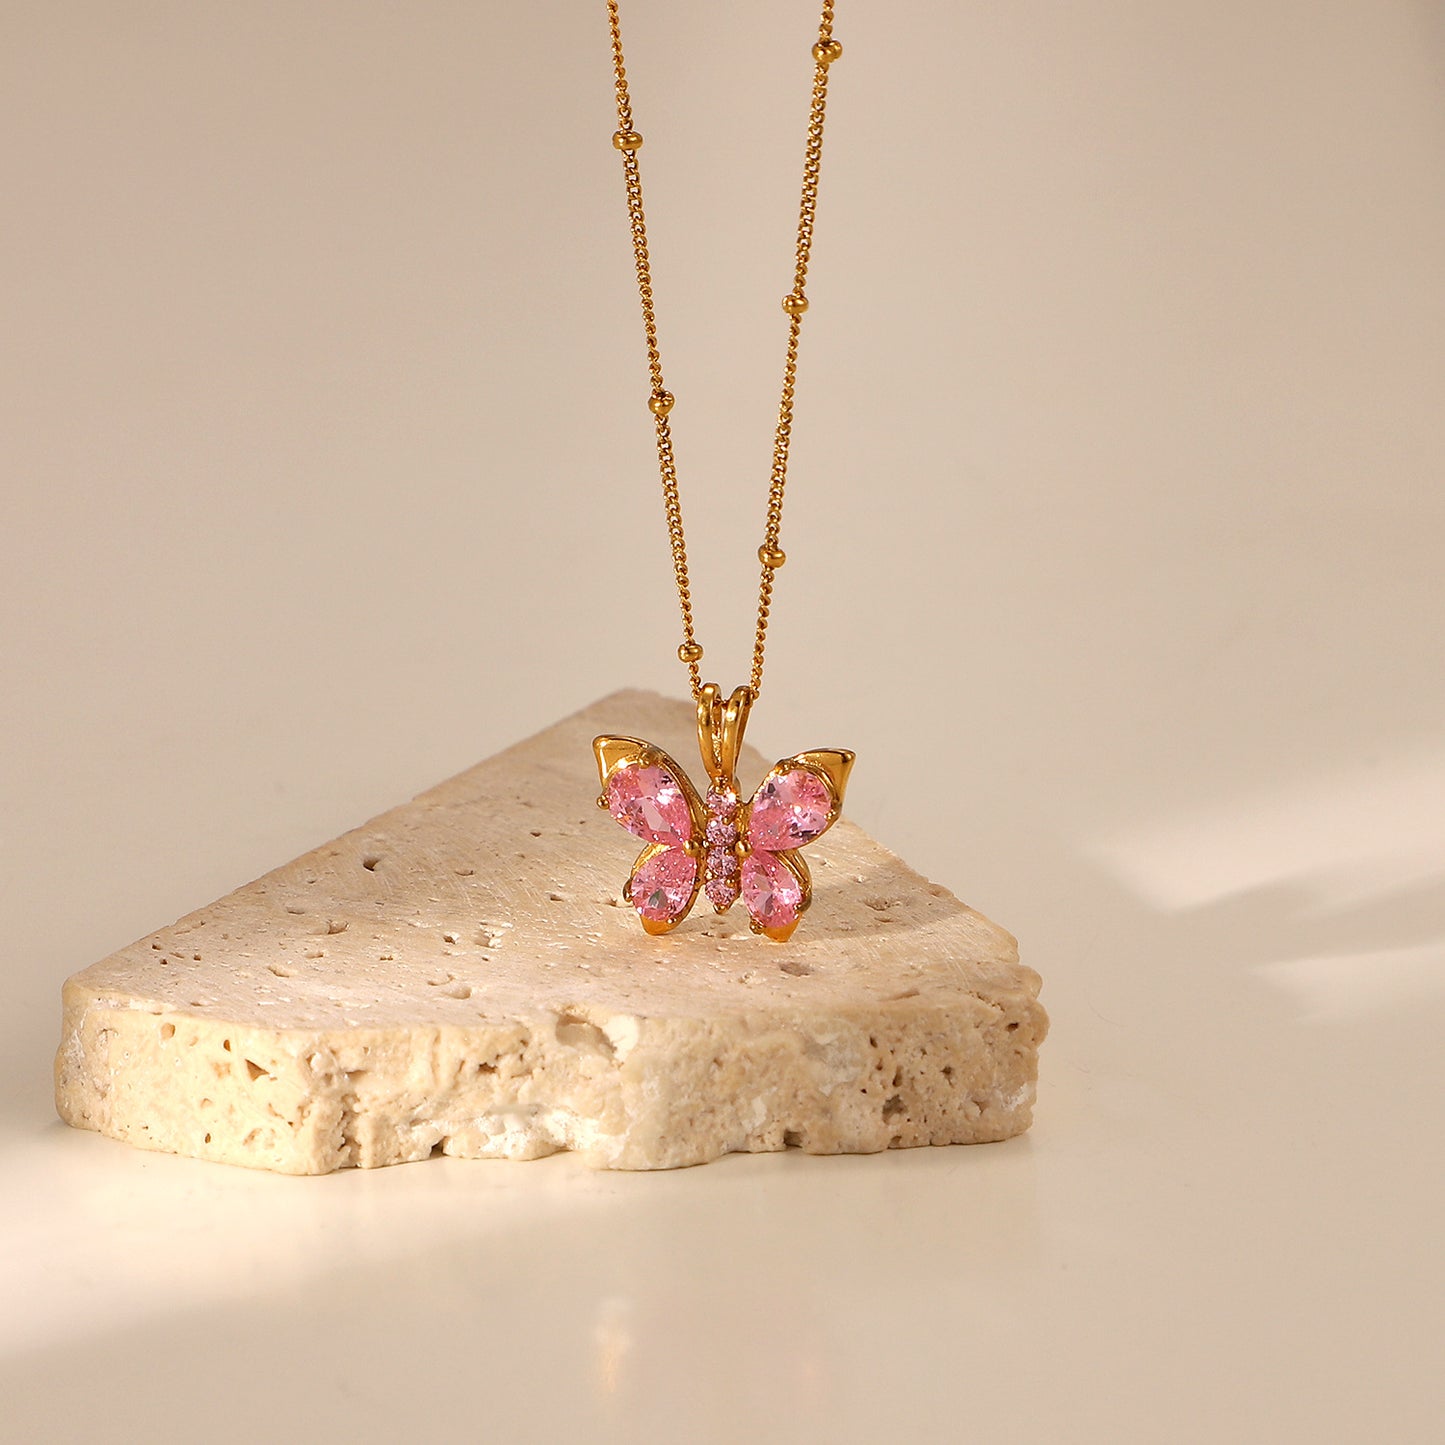 Butterfly Shaped Pendant Necklace